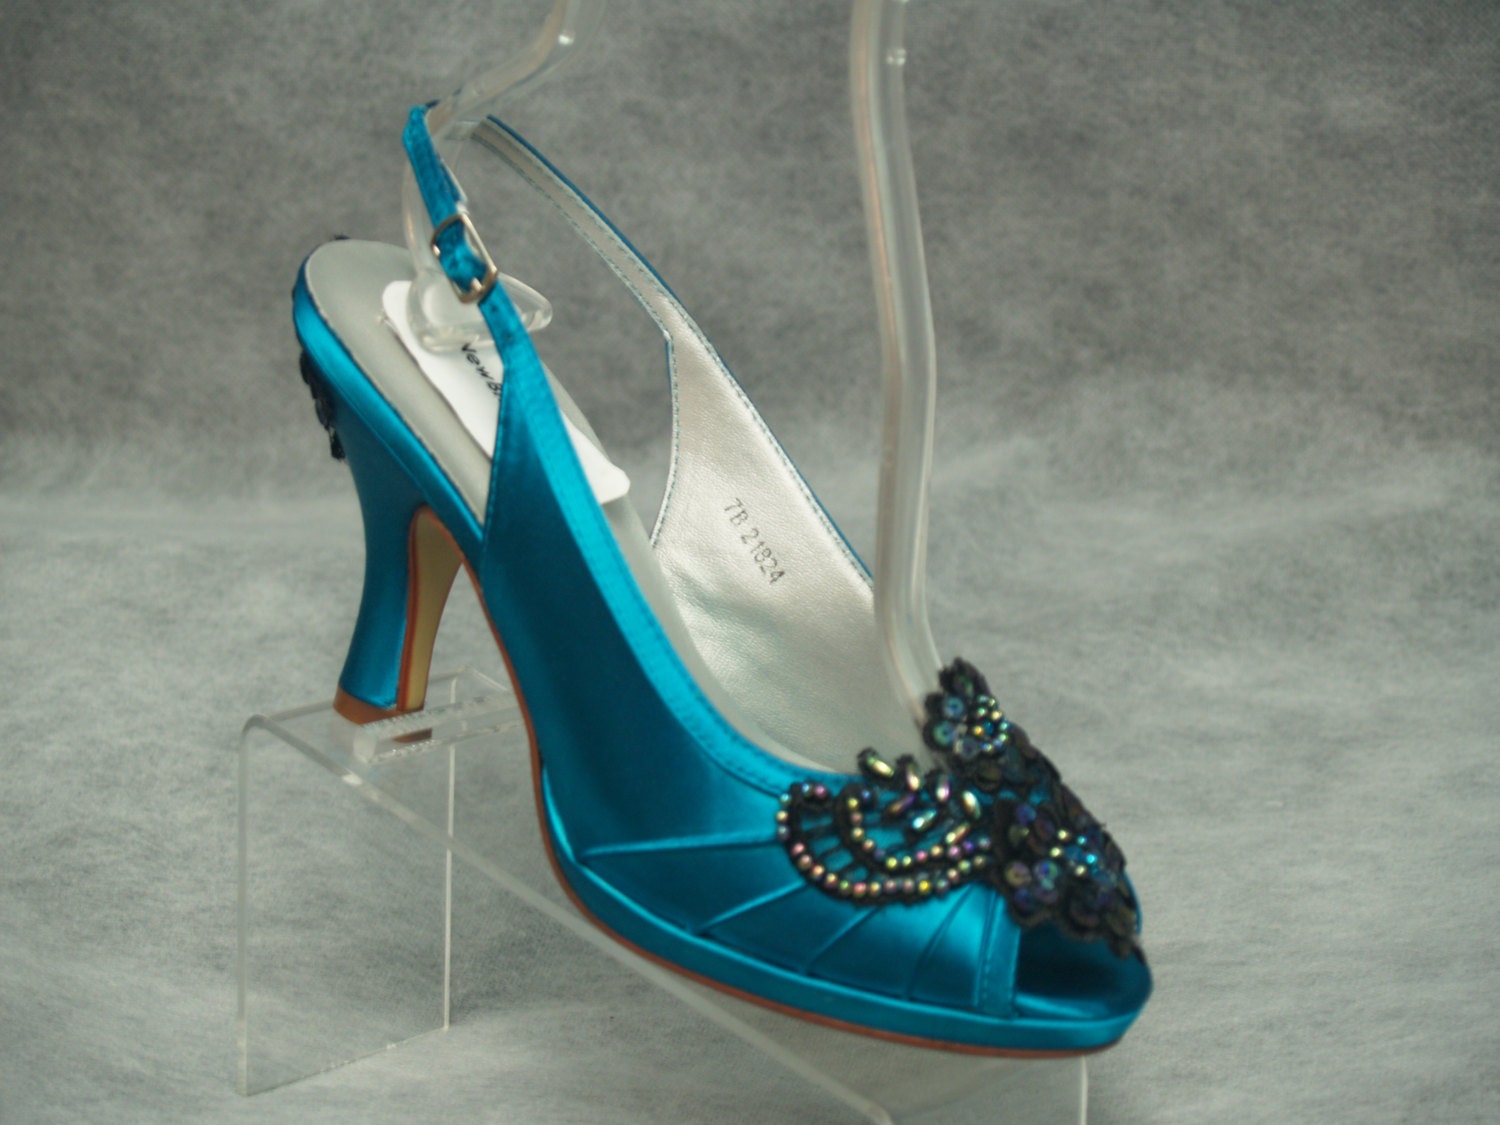 Teal Bridal Shoes Teal Wedding Shoes With Crystal Applique 100 Additional  Colors to Pick From - Etsy